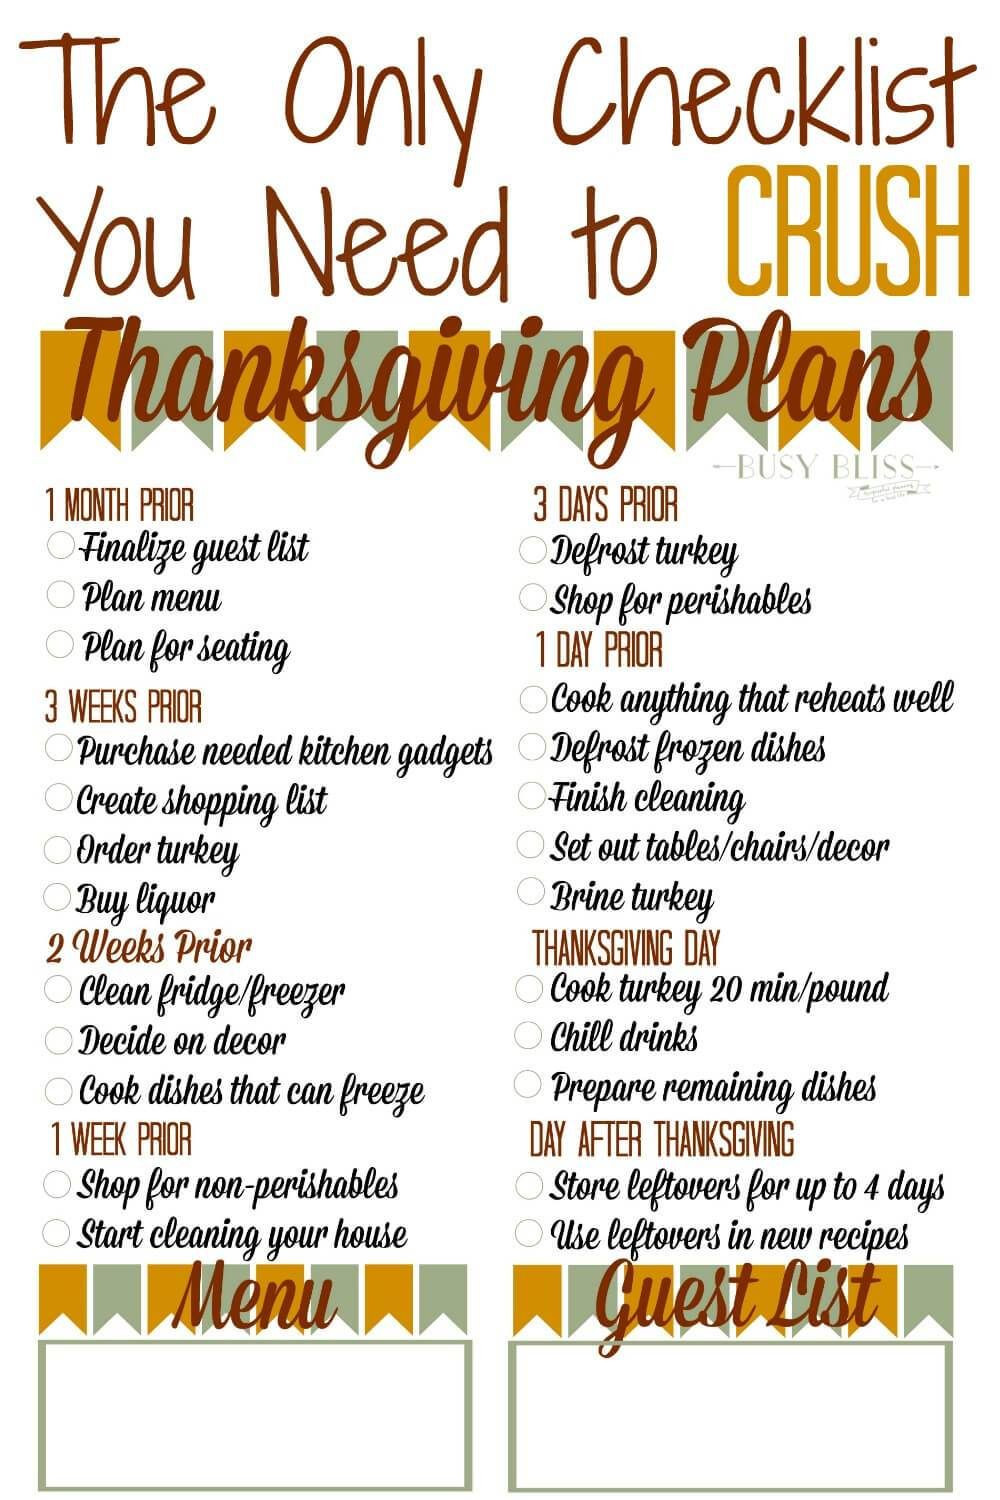 Planning Thanksgiving Dinner Checklist
 The ly Checklist You Need to Crush Thanksgiving Planning